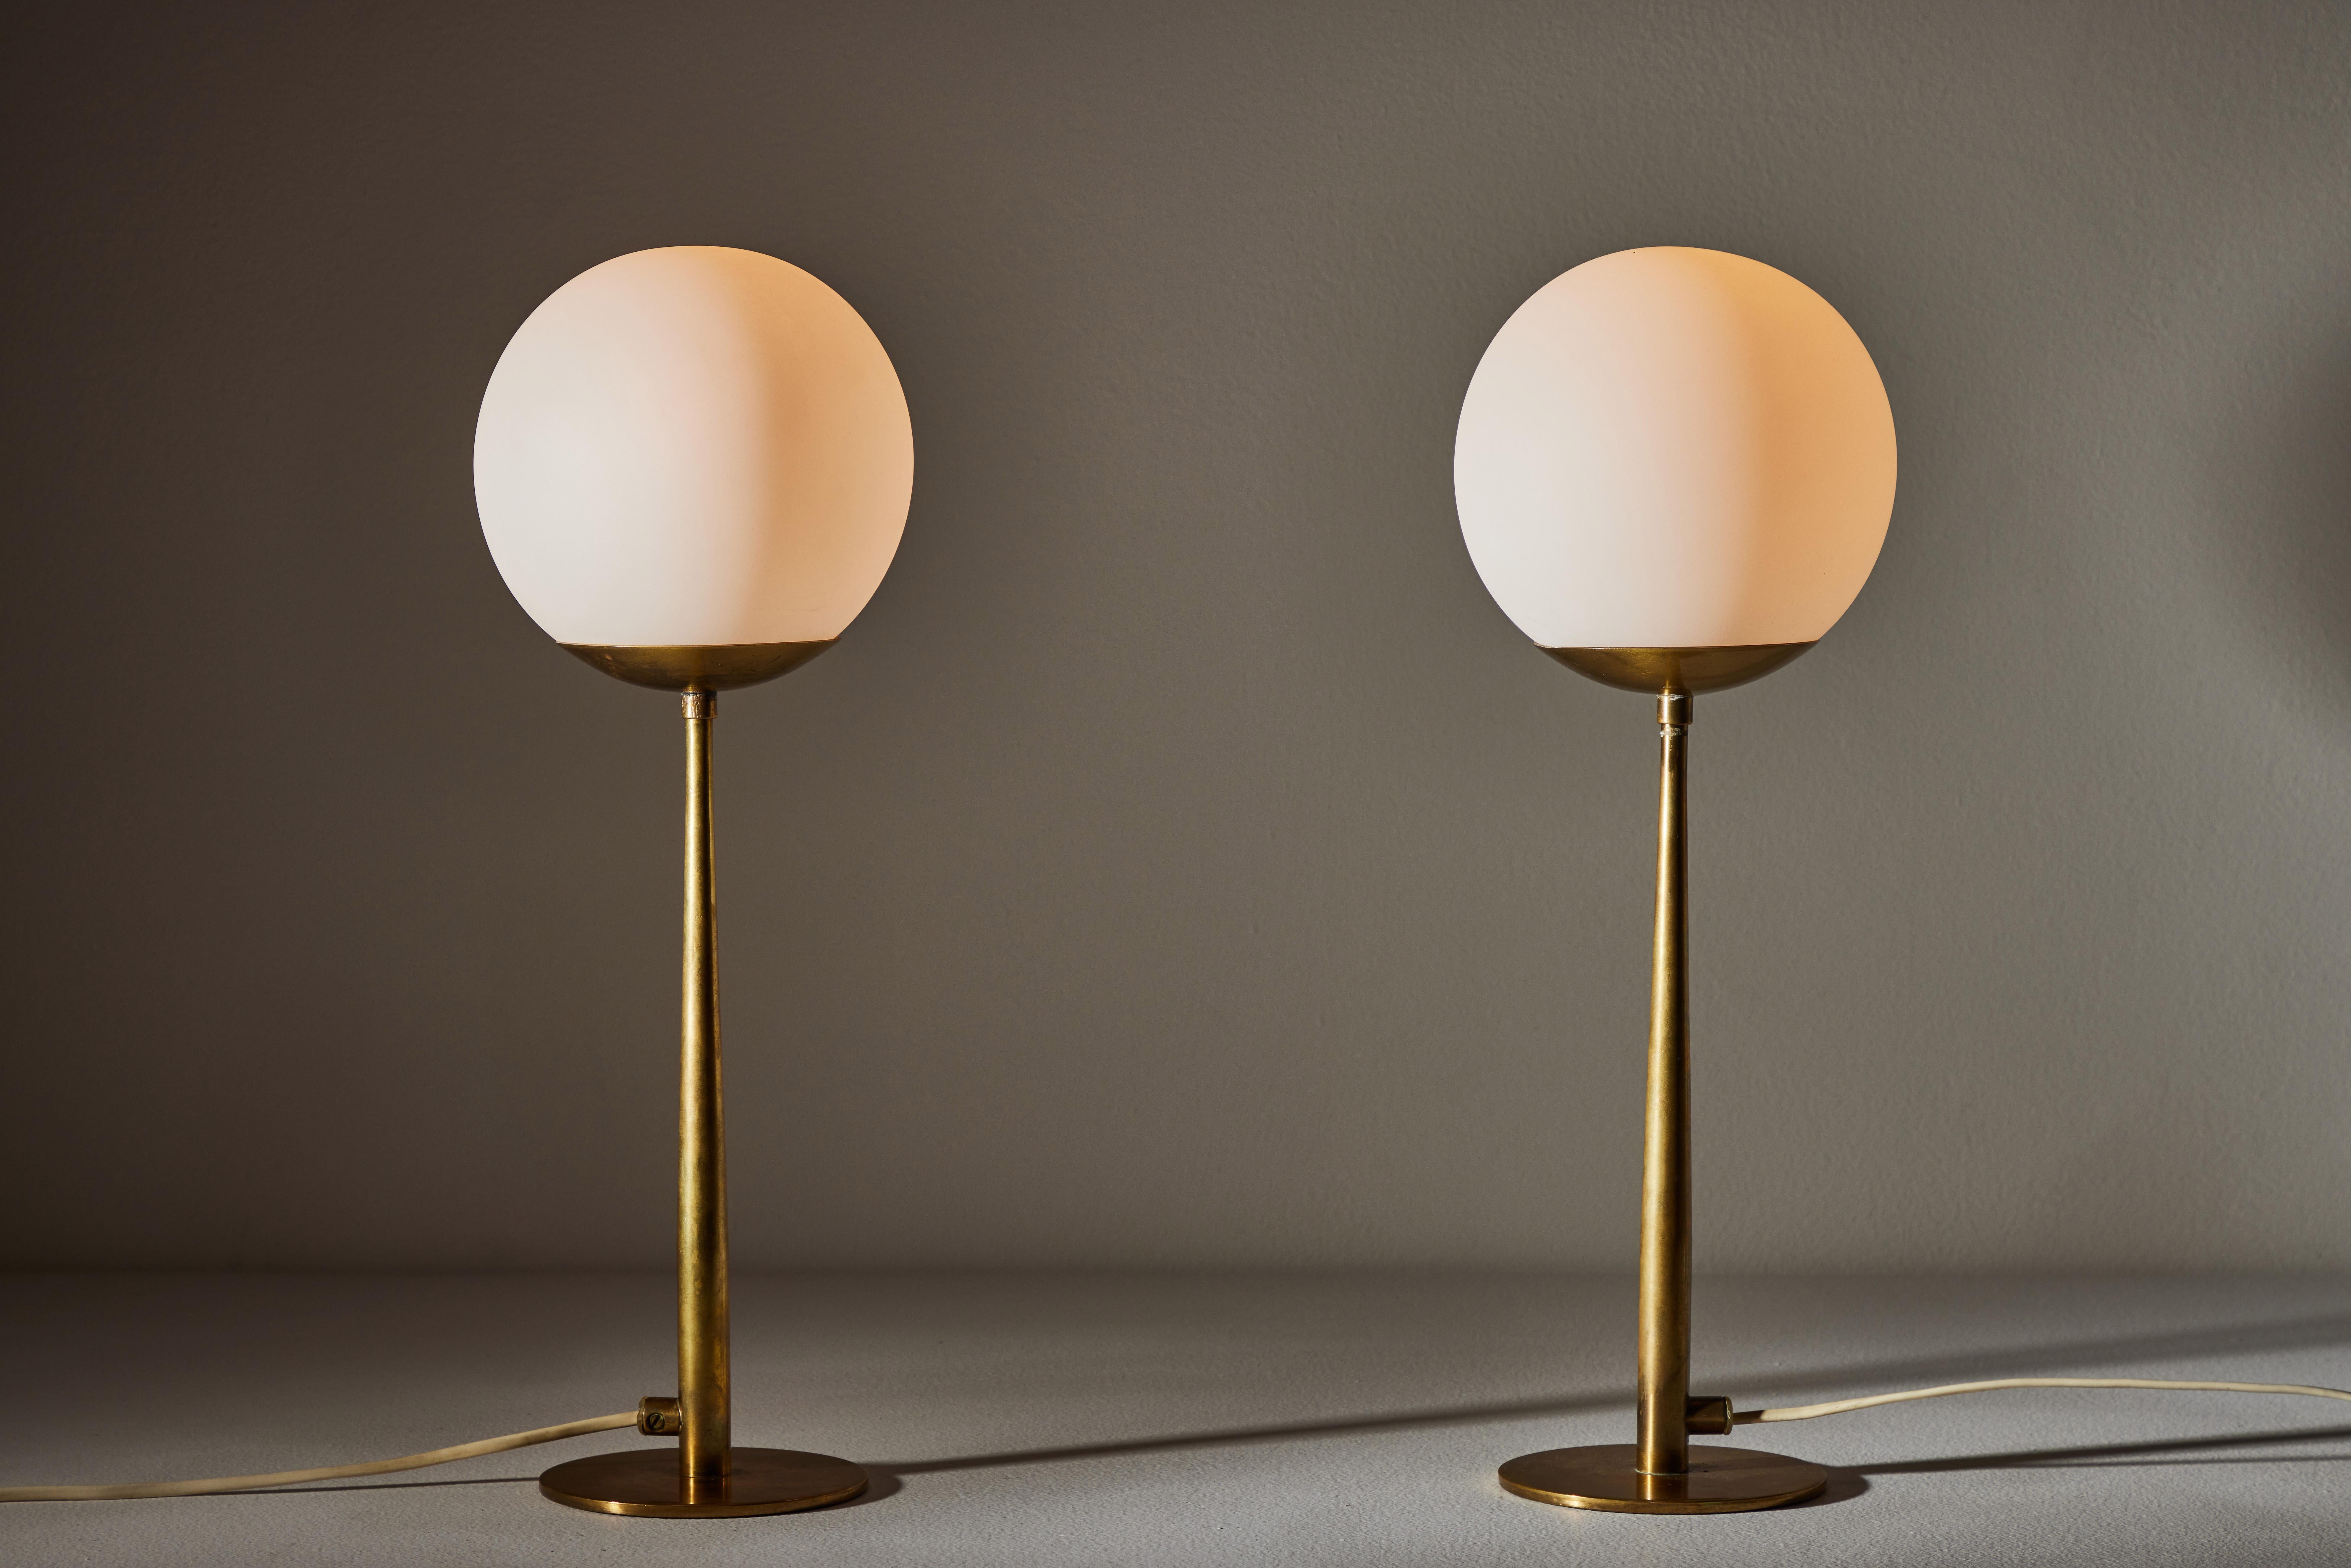 Rare pair of table lamps by Hans-Agne Jakobsson. Designed and manufactured in Sweden, circa 1950s. Opal glass diffusers, brass stems. Original European cords. We recommend one E27 60w maximum bulb per fixture. Bulbs provided as a one time